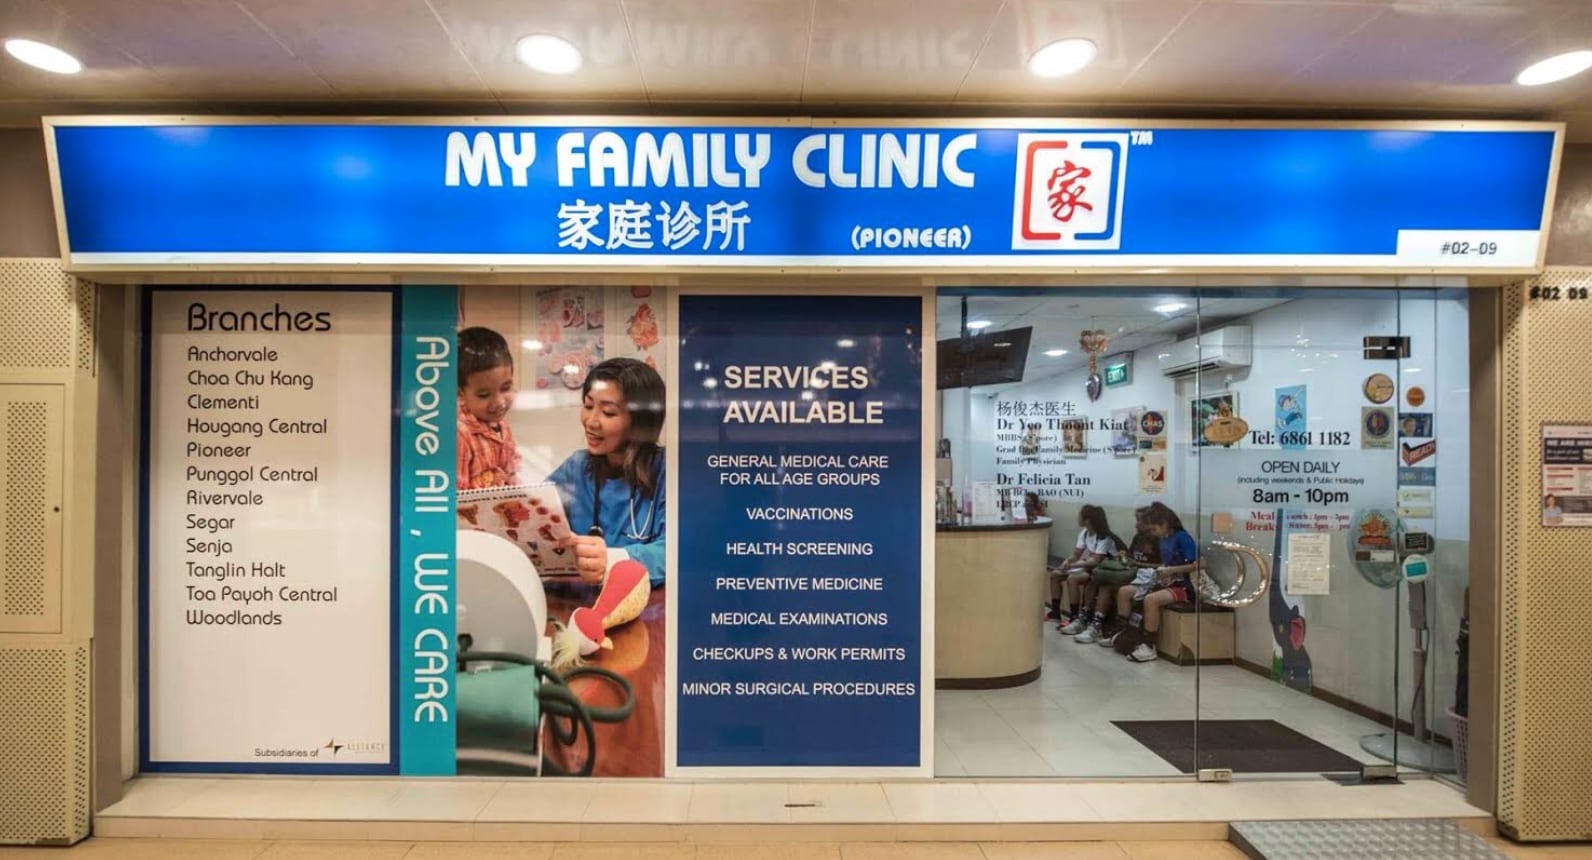 My Family Clinic (Pioneer)